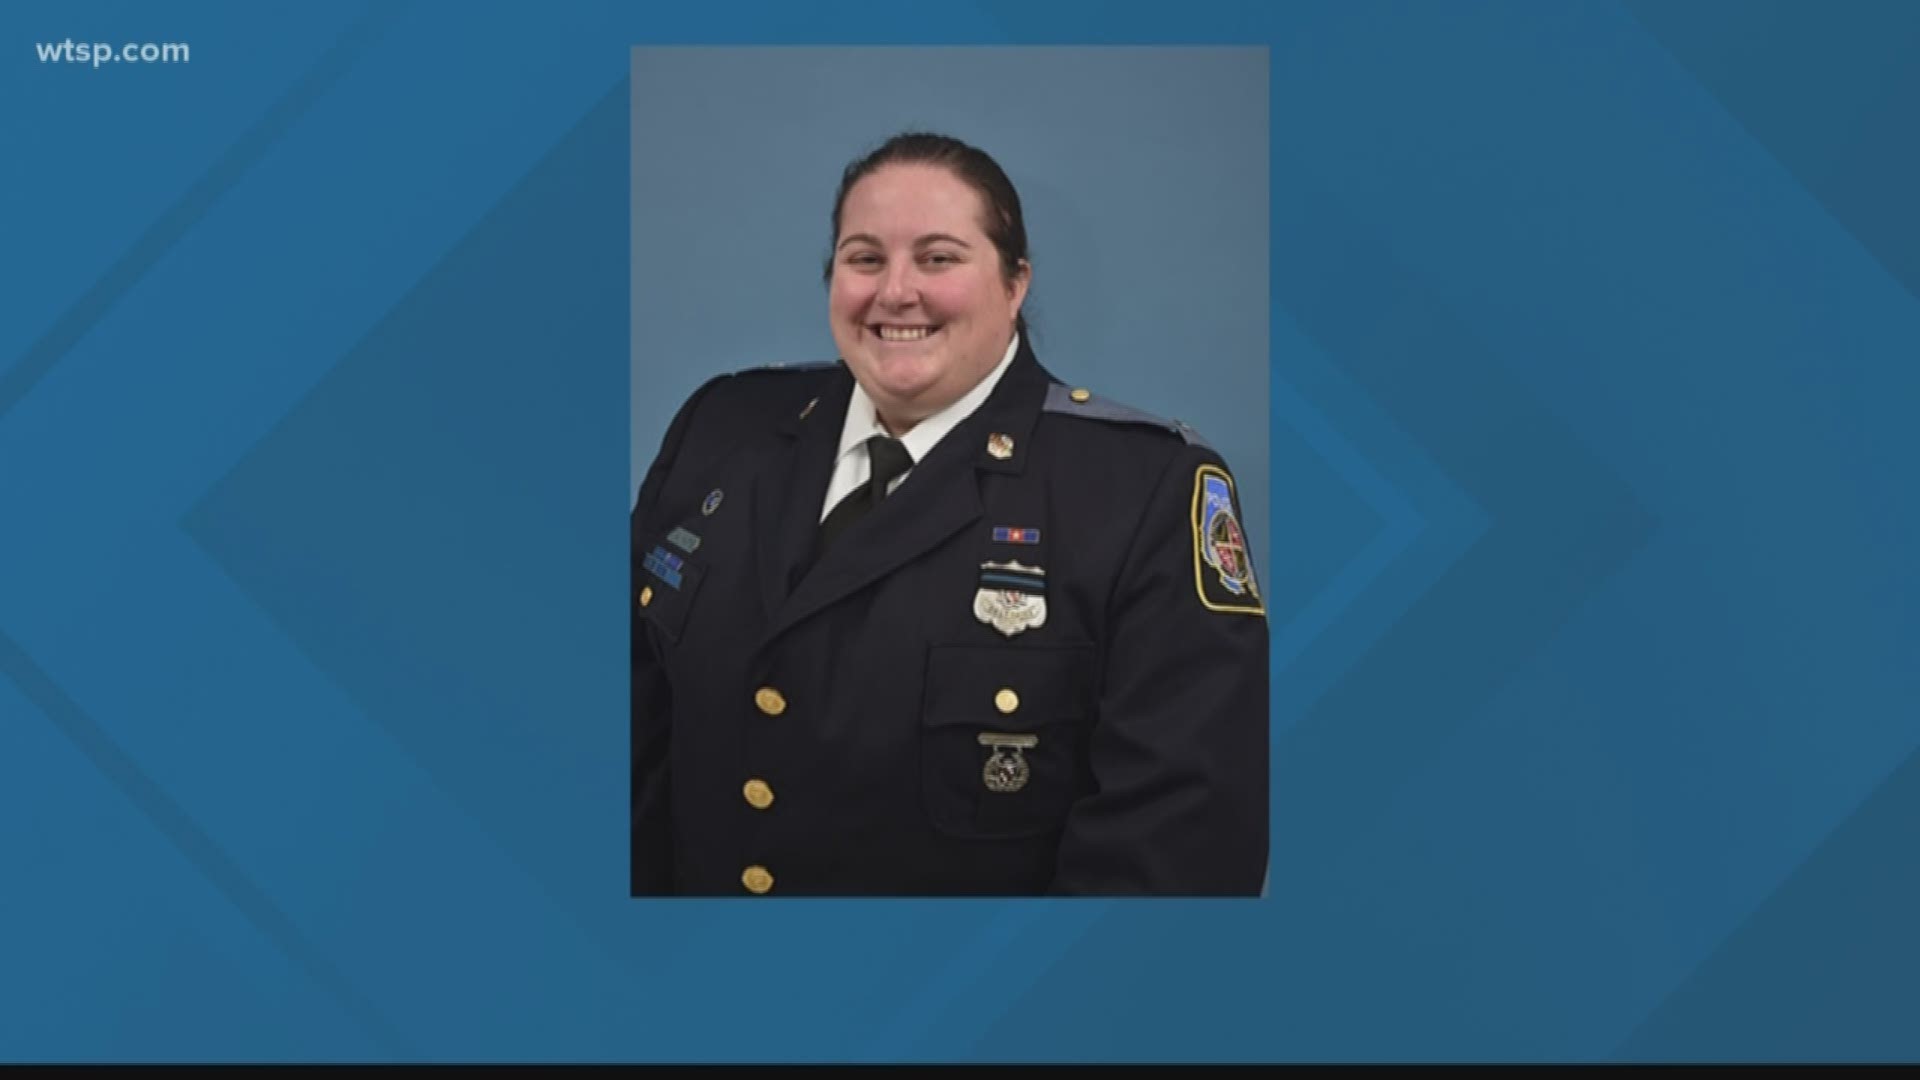 Sarasota Police Chief Bernadette DiPino's daughter, Baltimore County Police Officer First Class Tabitha Hays, was rushed to the hospital after being shot in the upper body during a call for a man with a gun just after 1:30 p.m. Thursday.